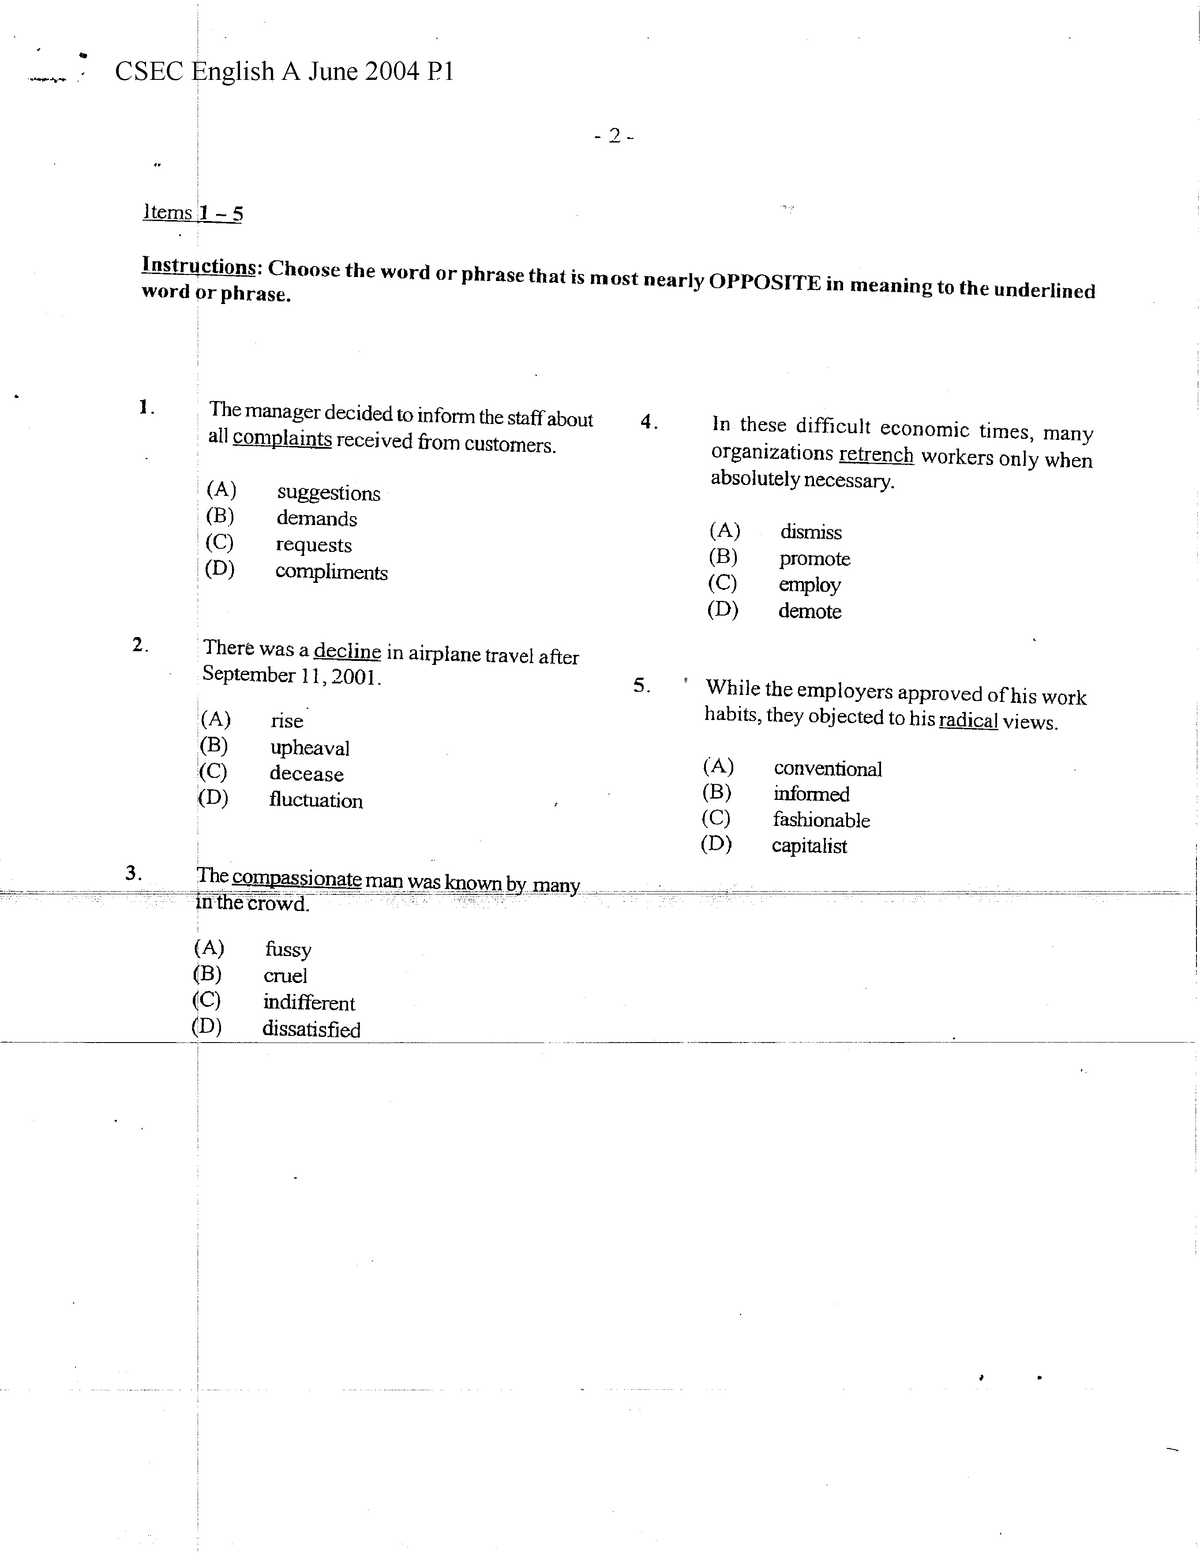 CSEC English A June 2004 P1 CXC CSEC Paper oto The Manager Decided To Inform The Staffabout